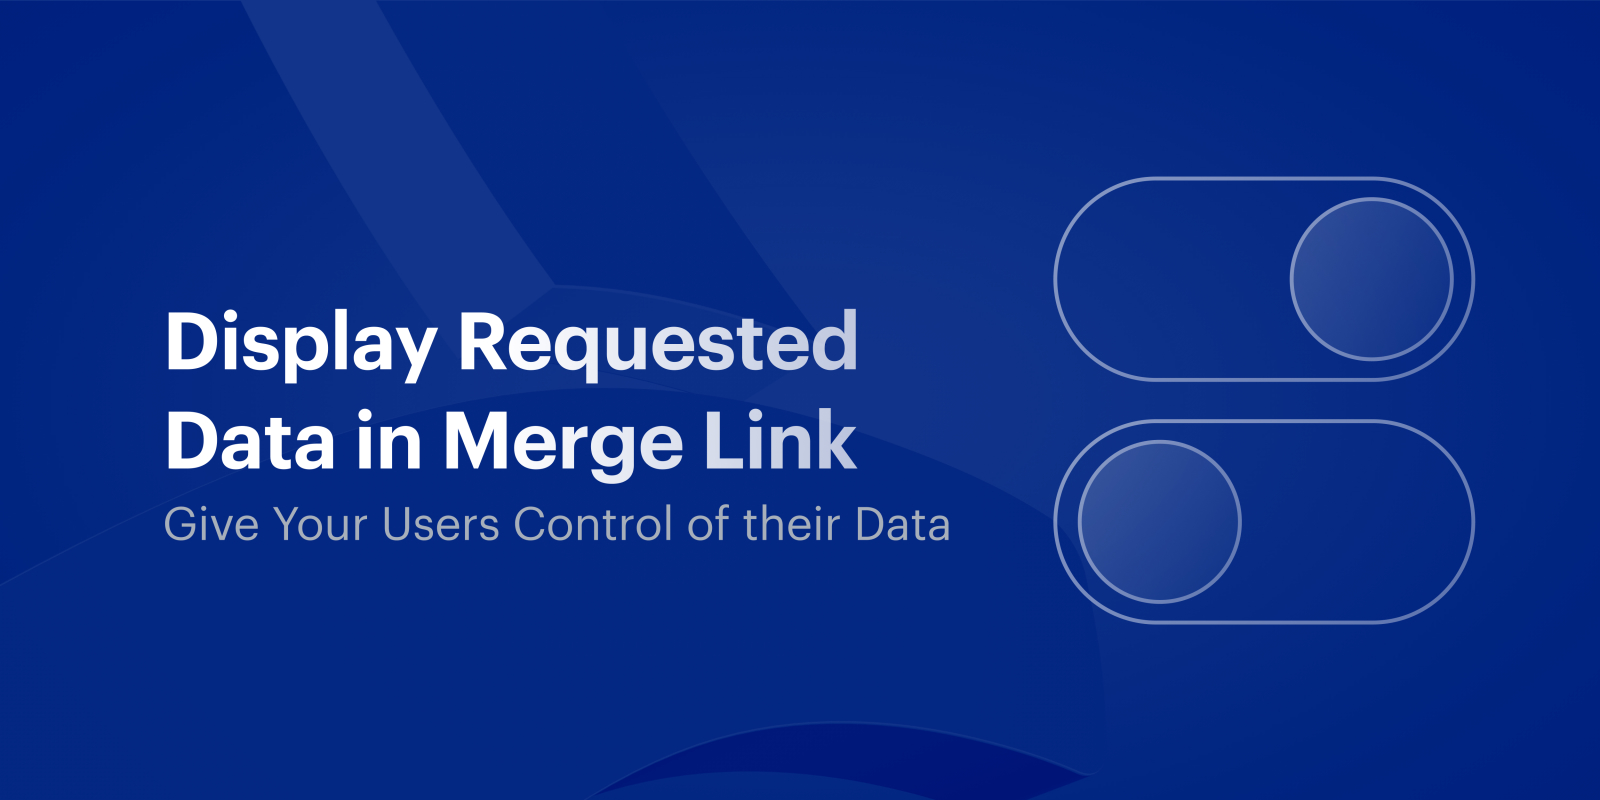 Introducing Requested Data in Merge Link 